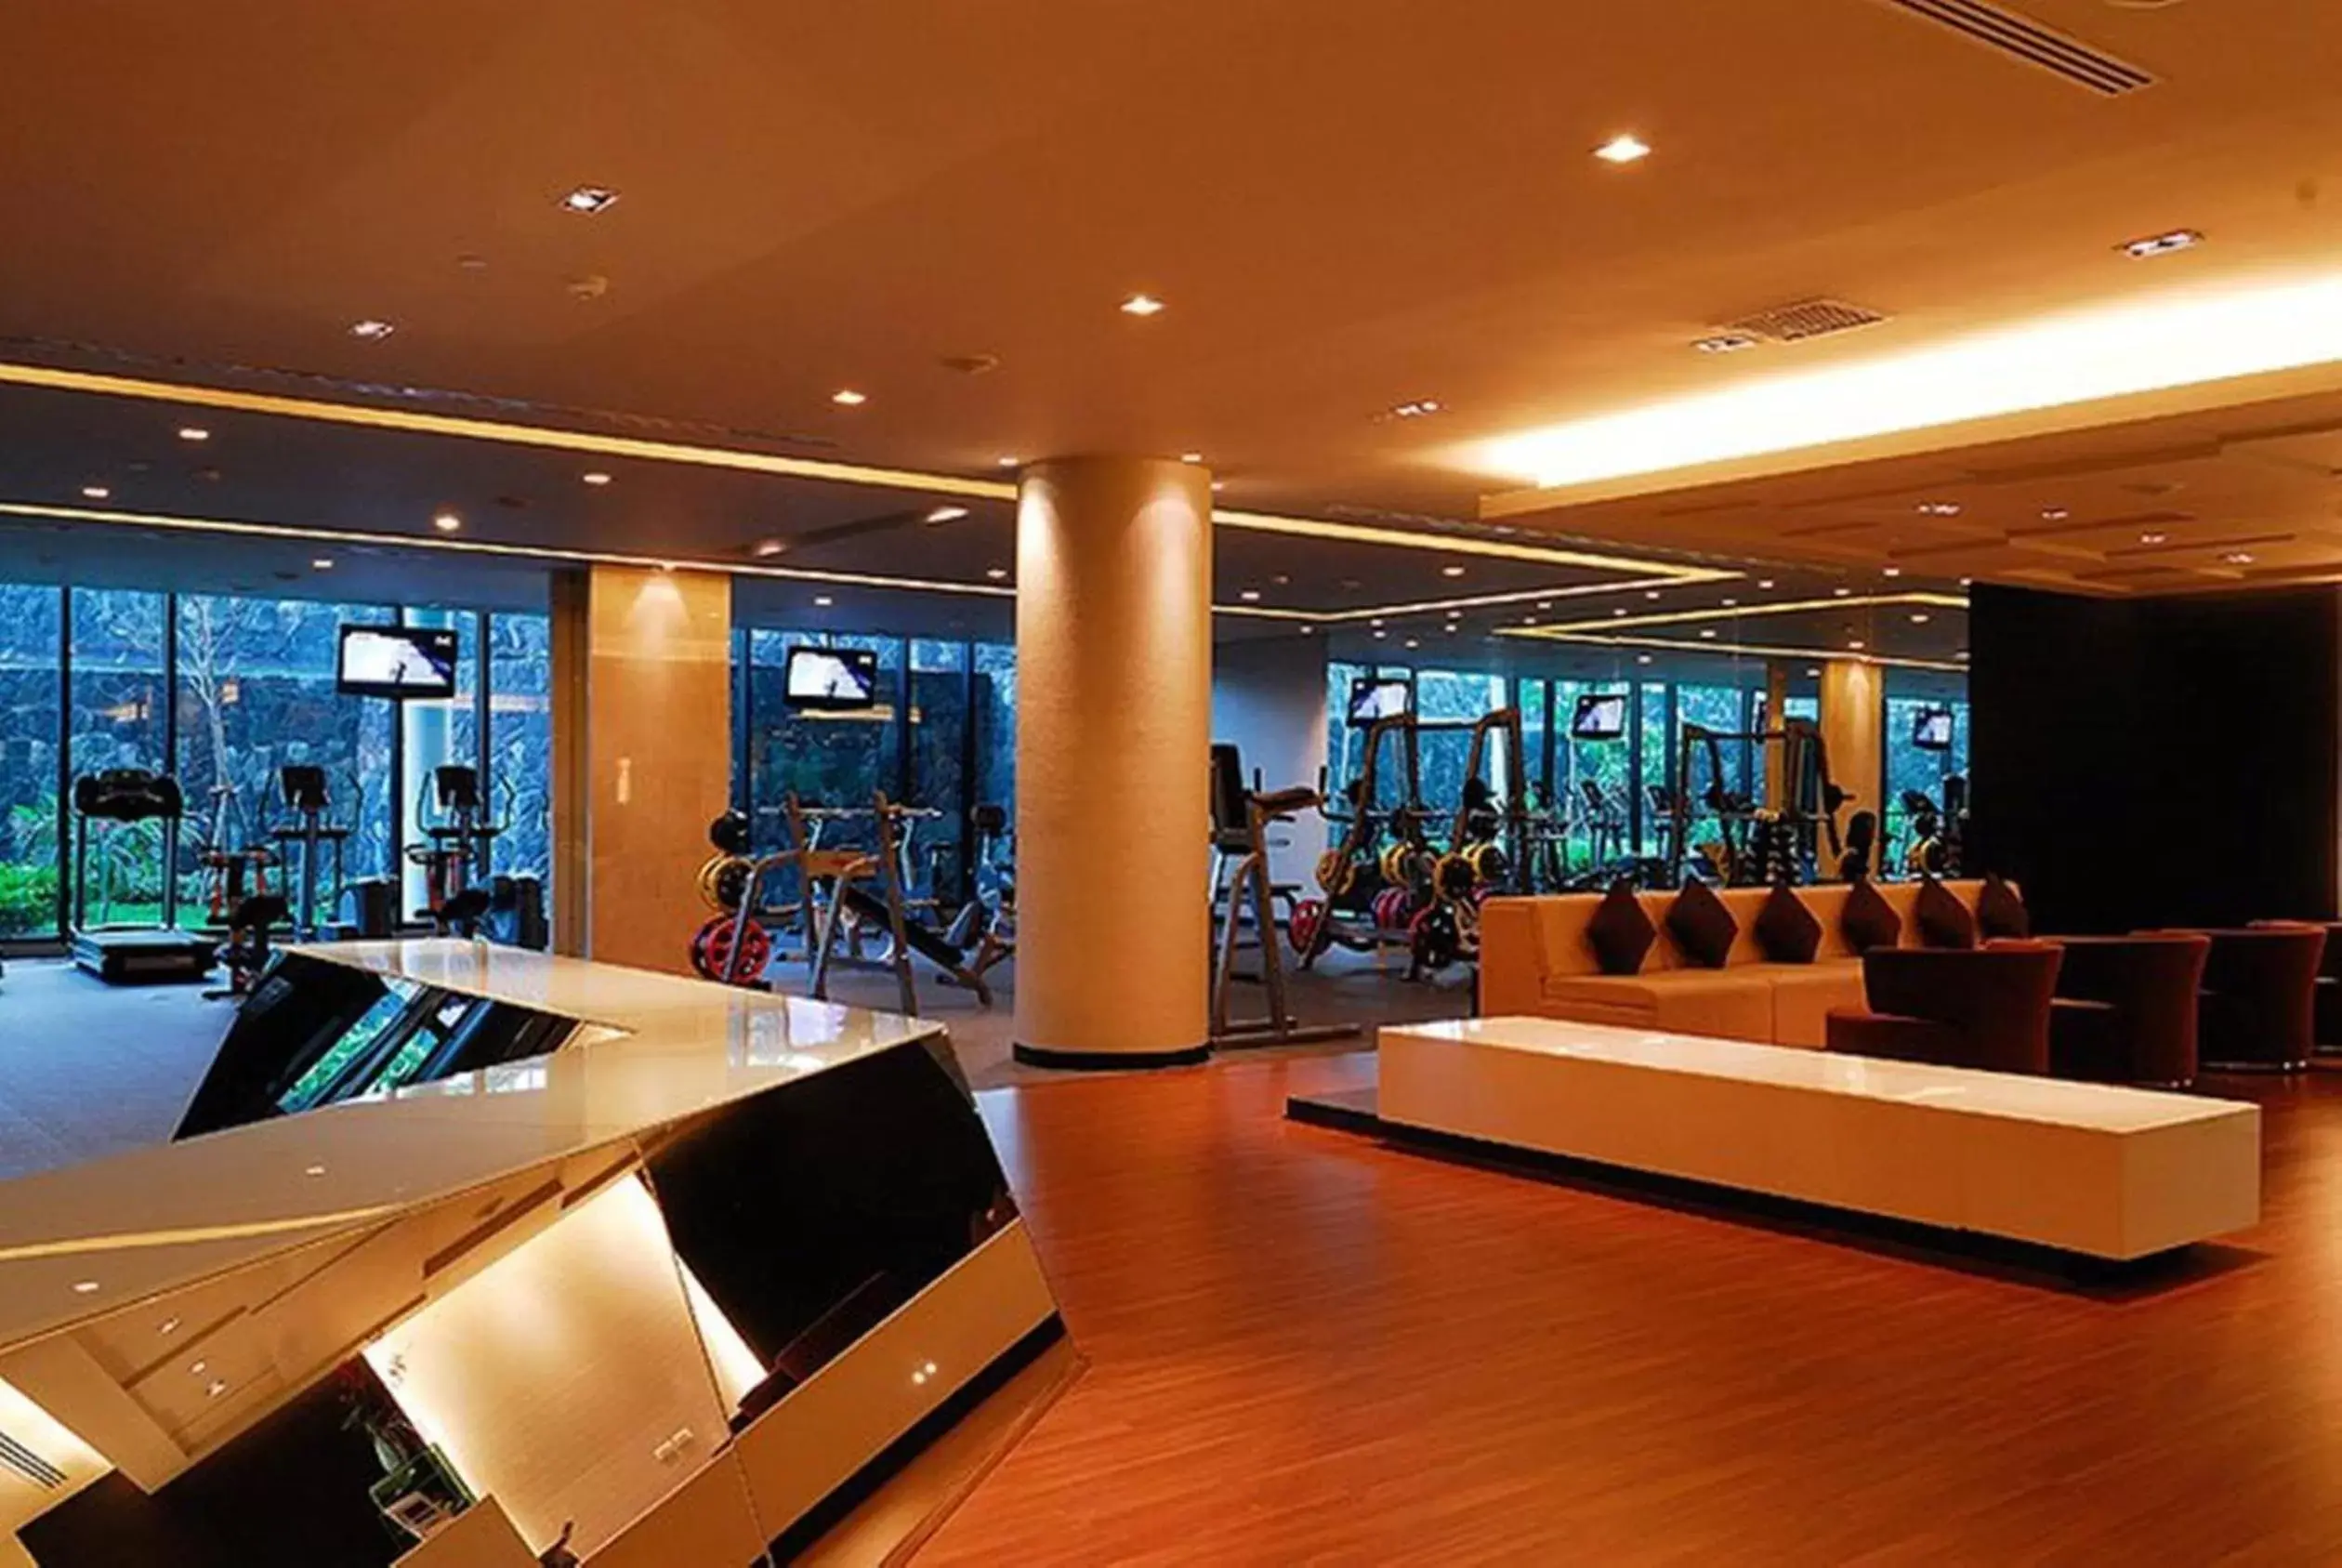 Fitness centre/facilities in The Zign Hotel